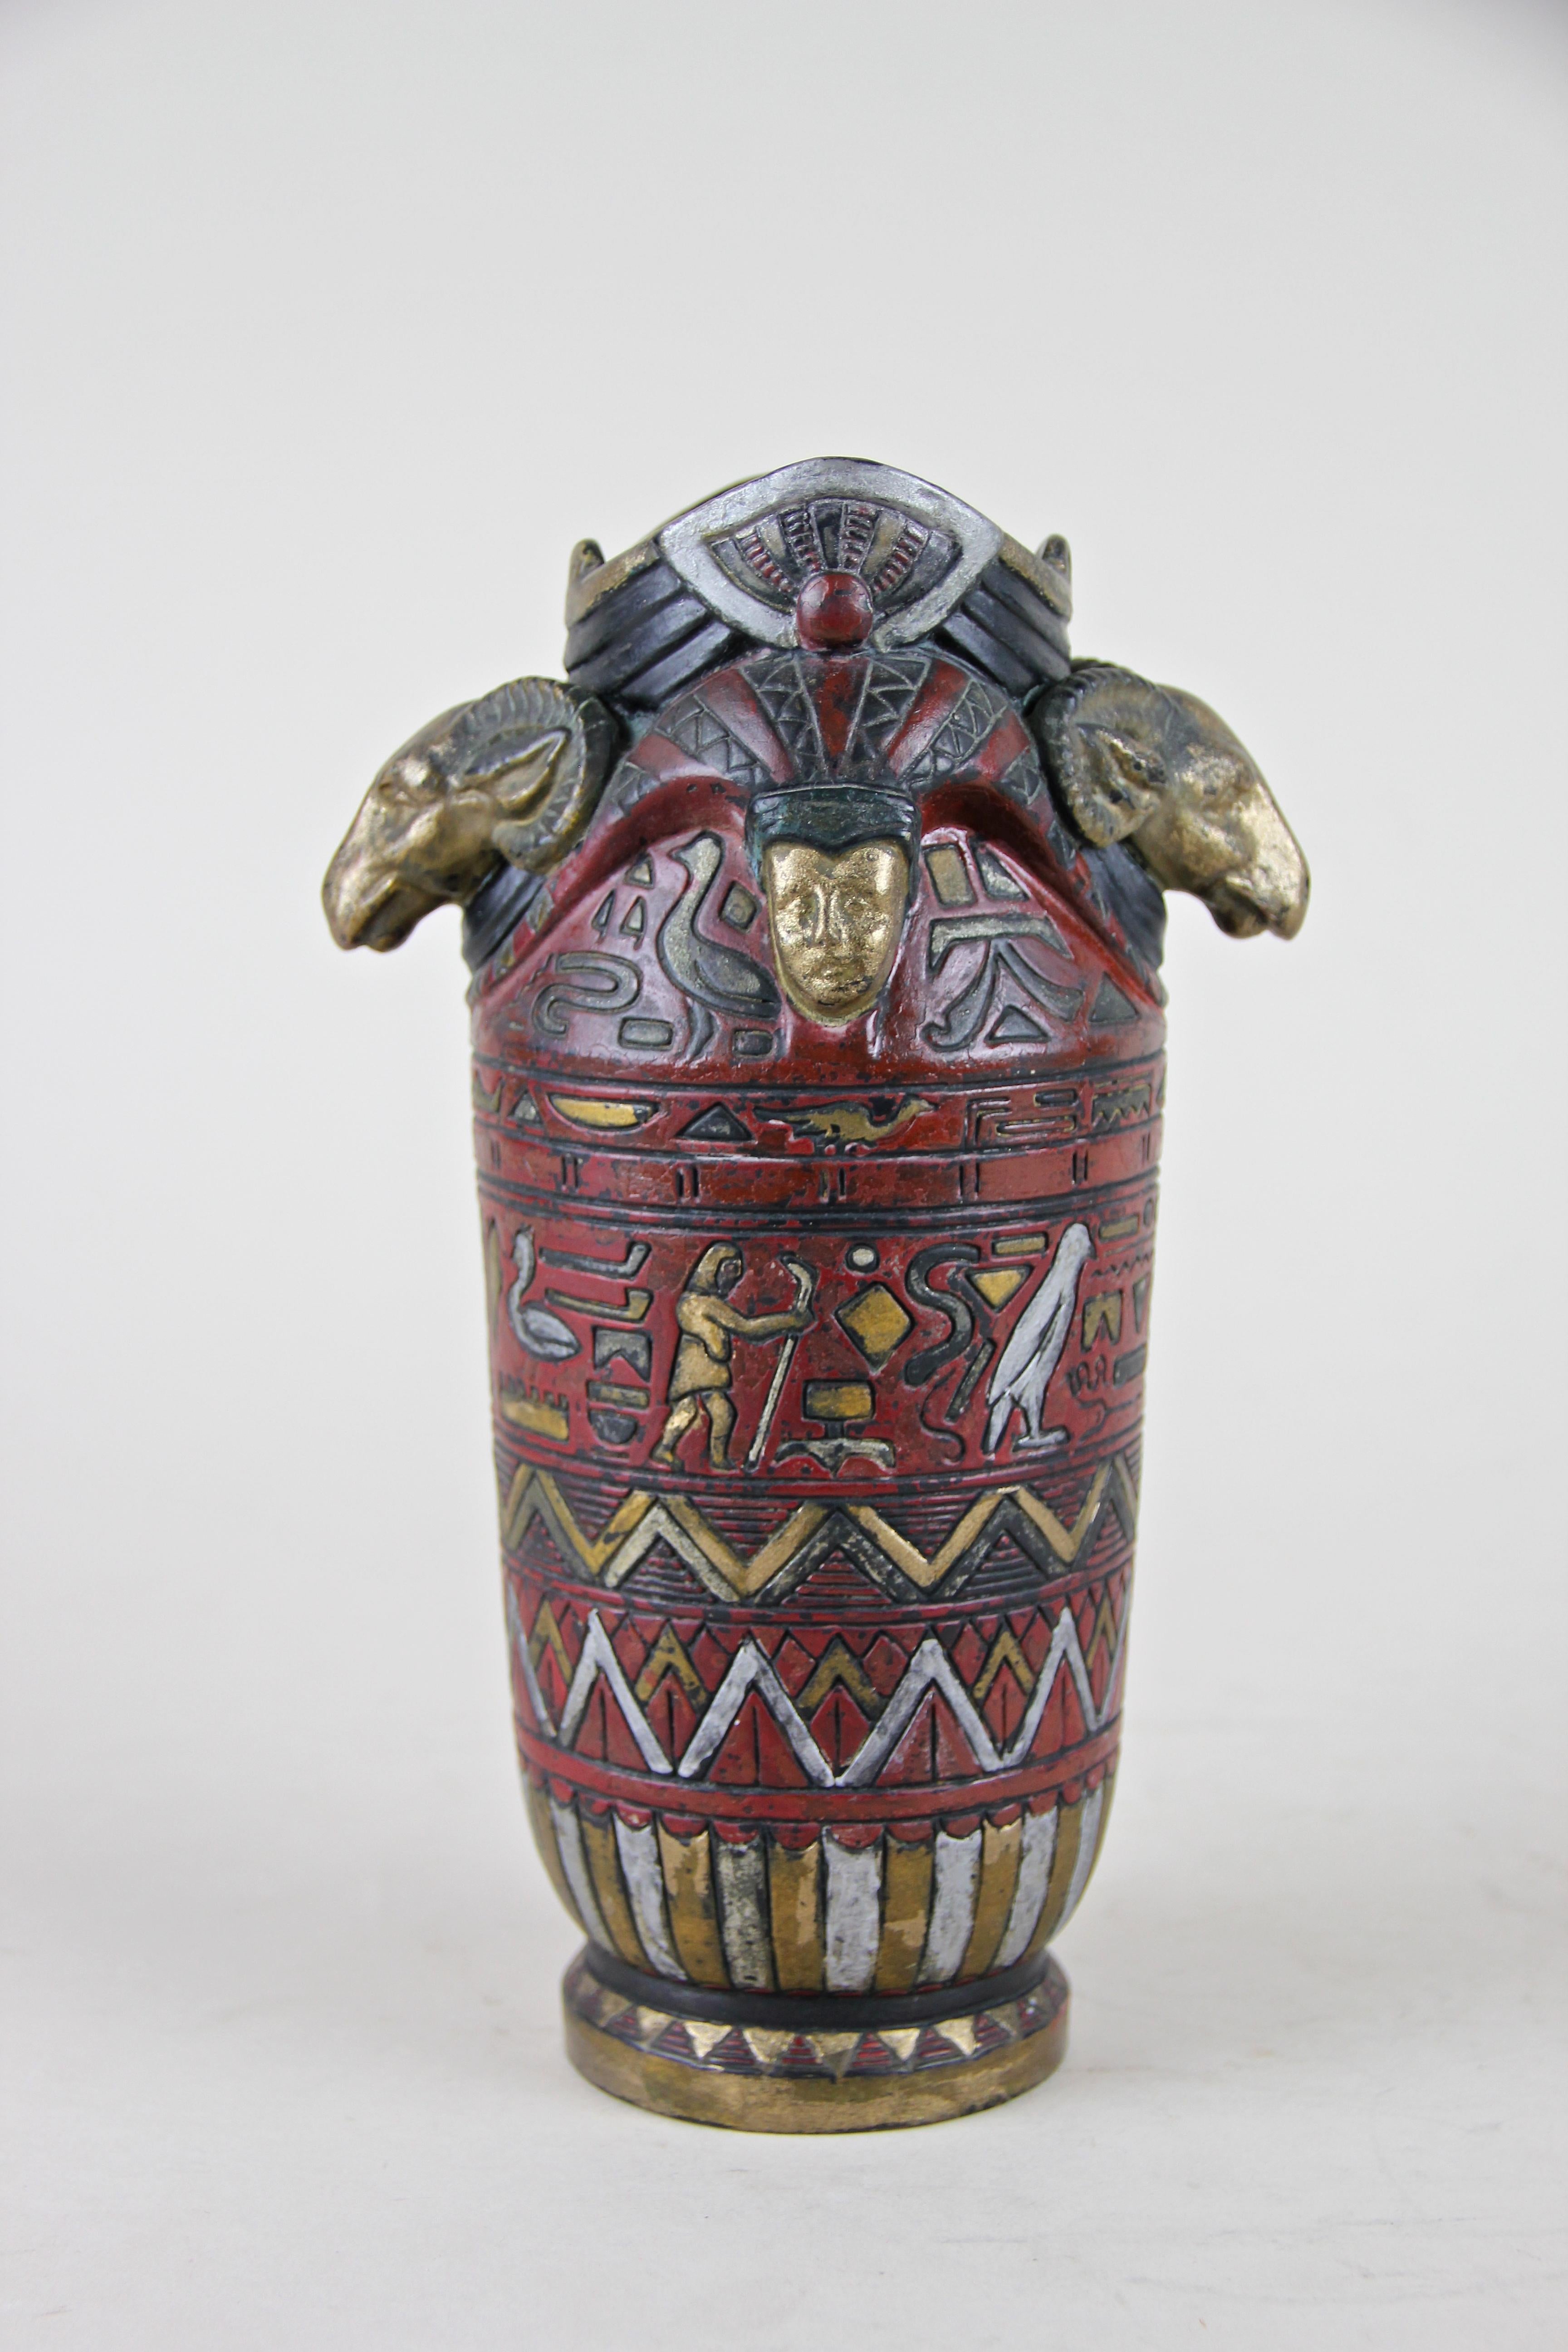 Beautiful rare Majolica vase by Julius Dressler, circa 1895. The fantastic art pottery Egyptian styled vase comes with a dark red body crested with great designed hand painted hieroglyphs. On top two golden ram / pharaoh heads impress every